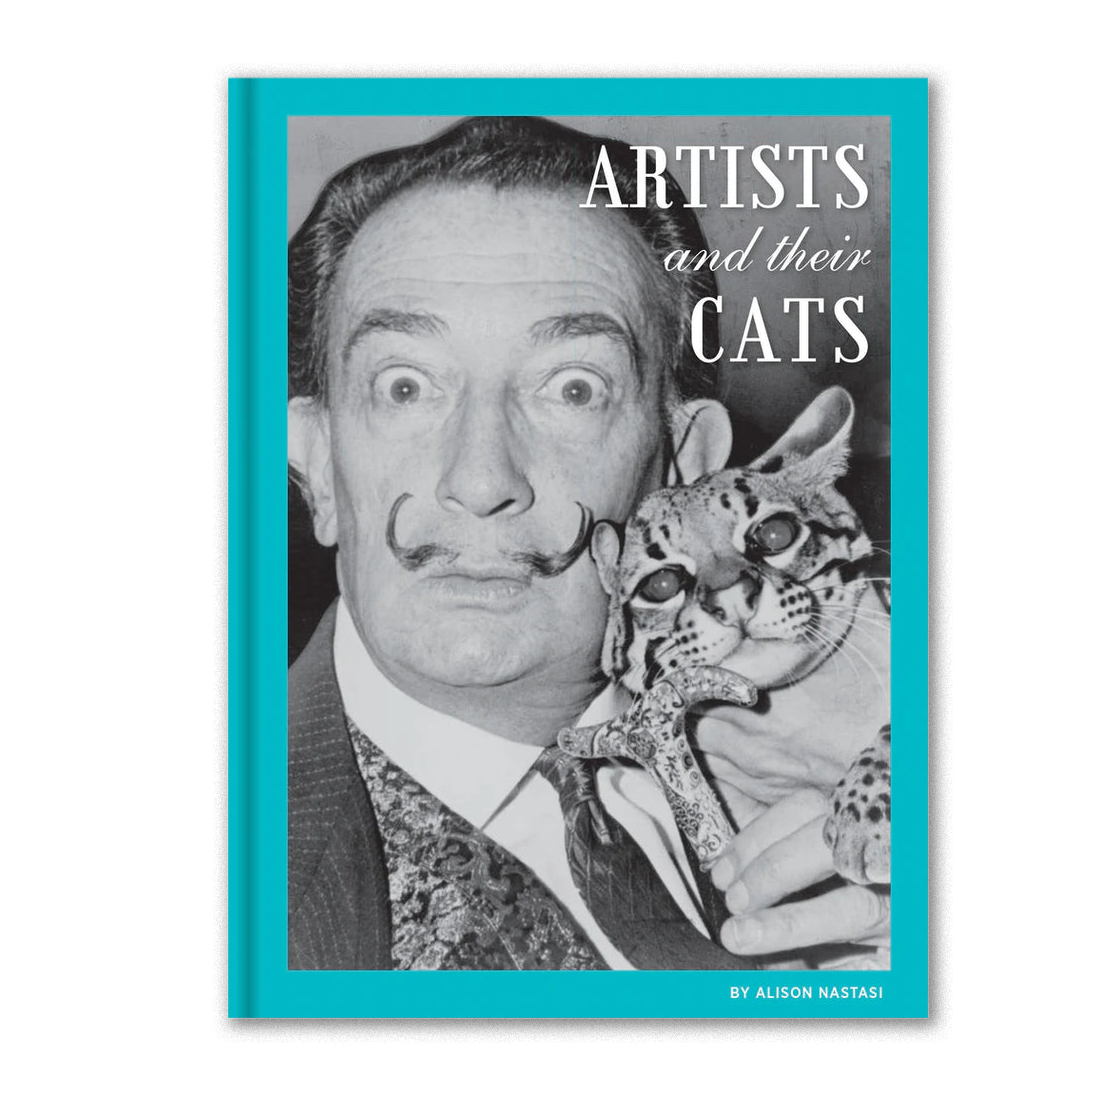 ARTISTS AND THEIR CATS